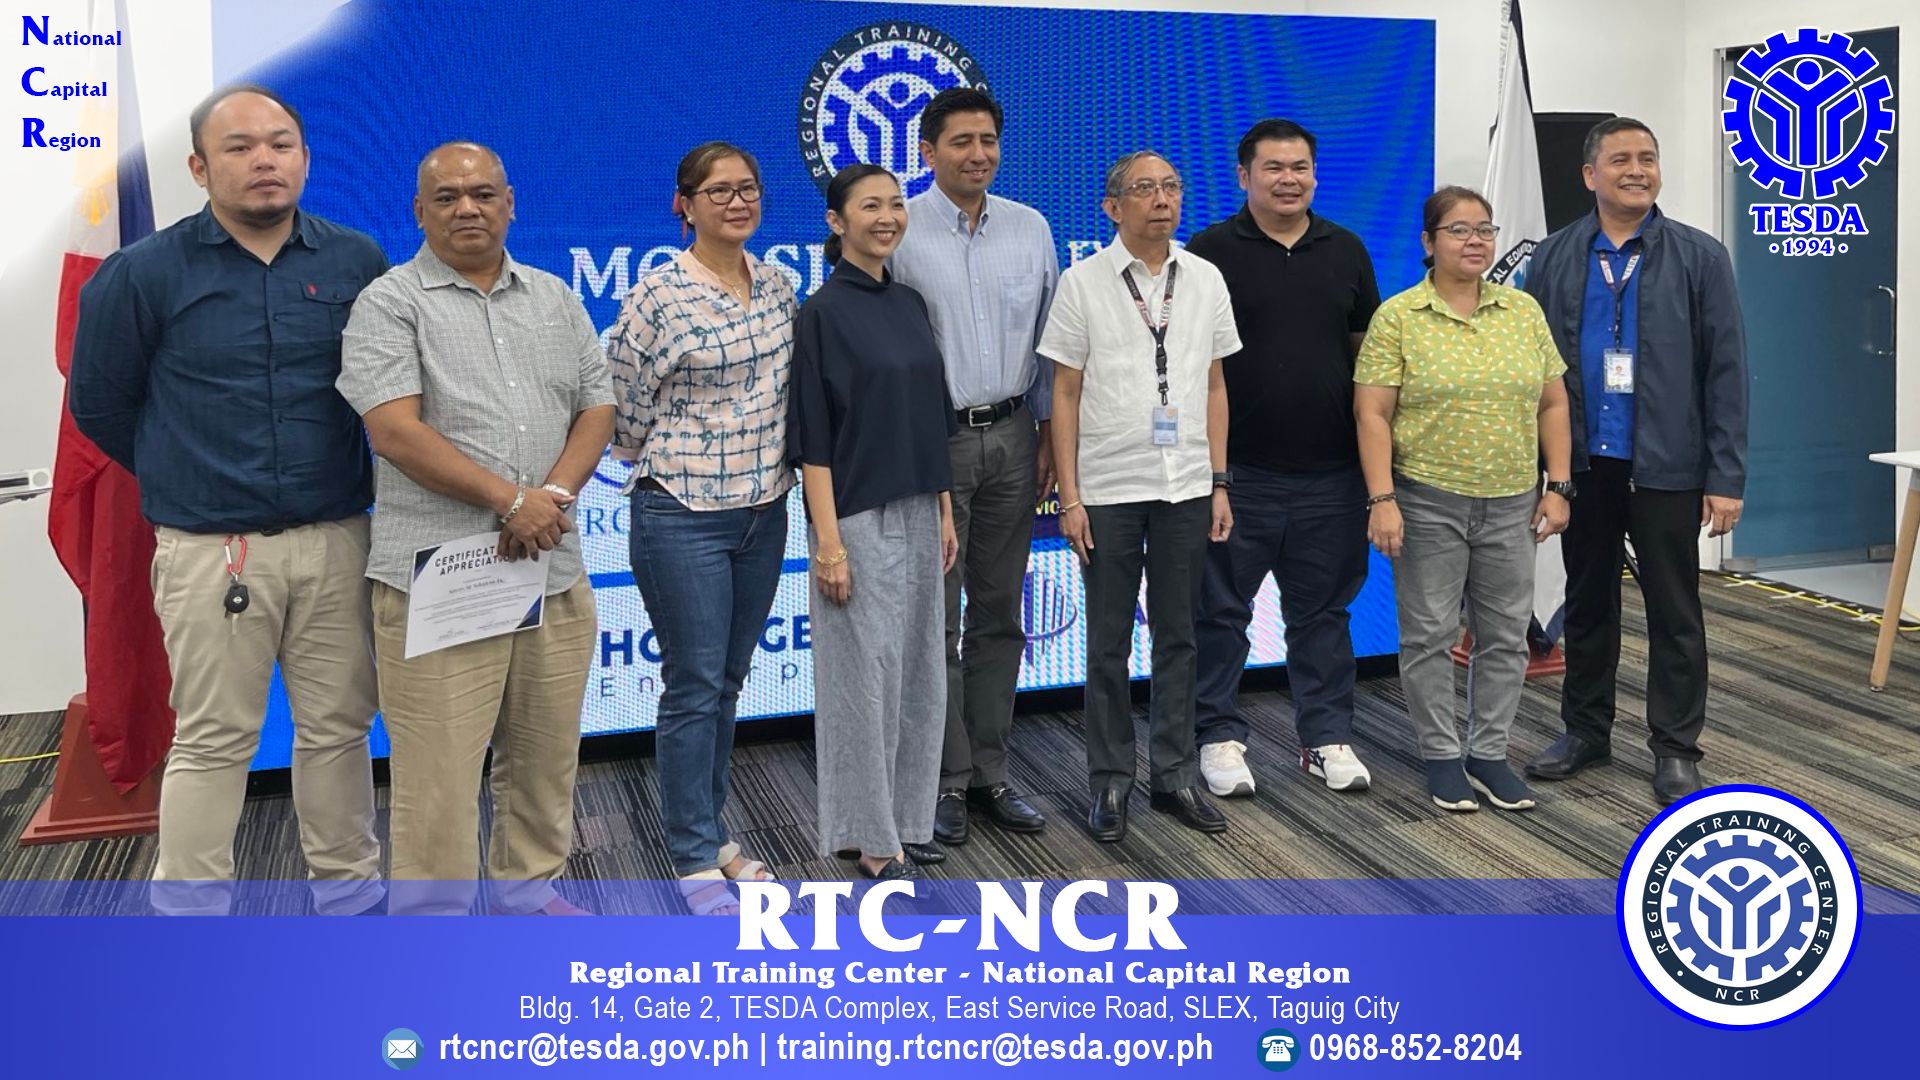 MOA Signing for Supervised Industry Learning of Commercial Air Conditioning Installation and Servicing NC III took place on January 23, 2023, at the RTC-NCR HVAC Facility.